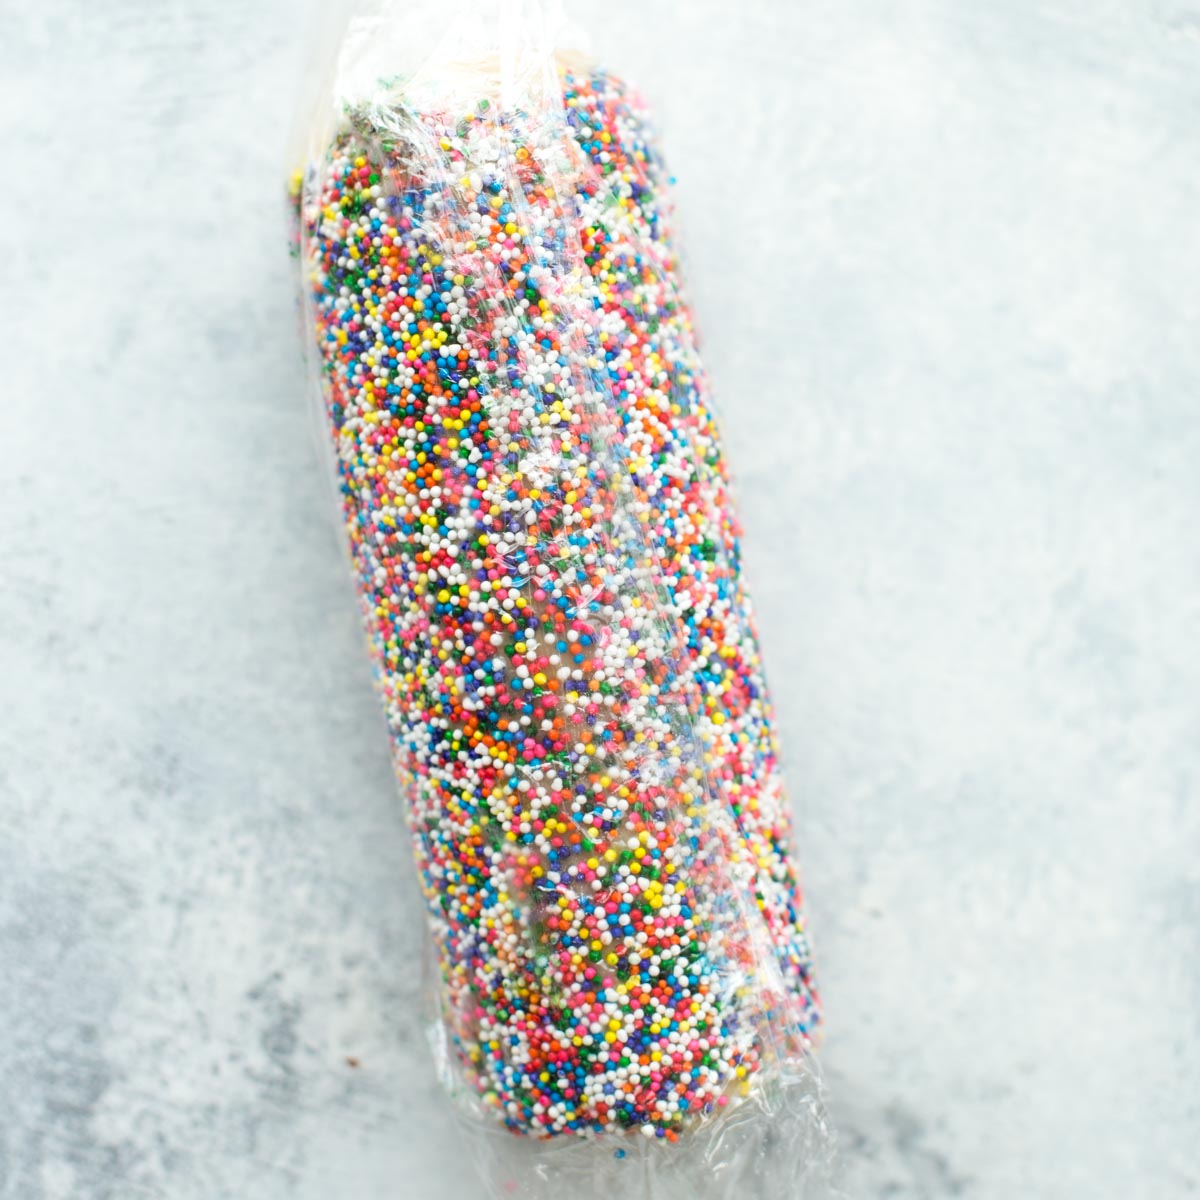 Cookie dough log with sprinkles on the outside wrapped in plastic wrap for St. Patrick's Day slice and bake cookies.